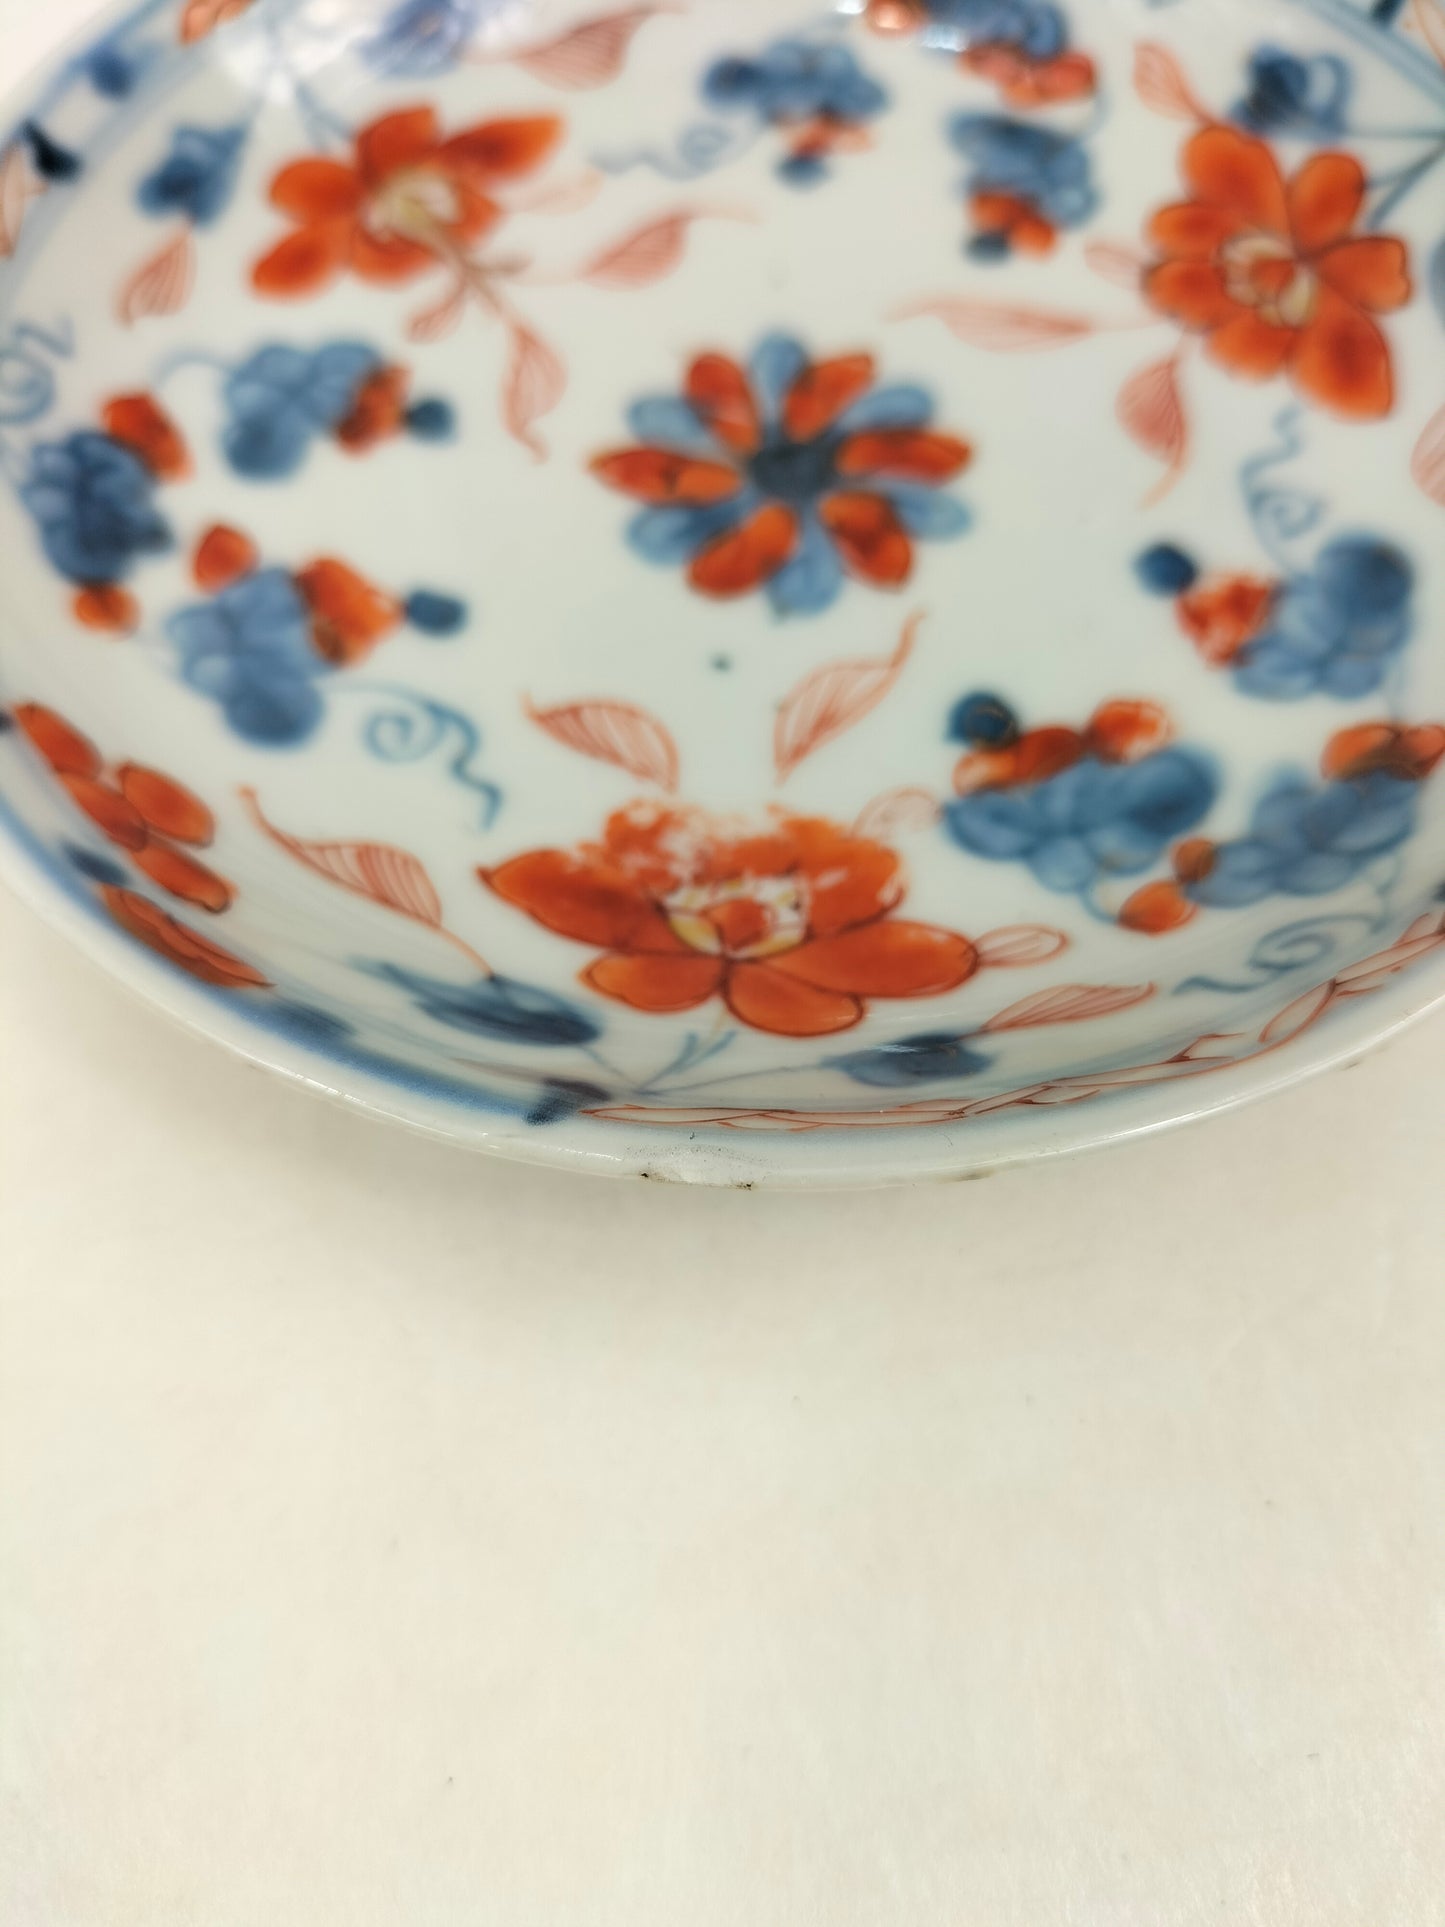 A set of 6 antique imari tea cups and saucers // Qing Dynasty - Kangxi - 18th century